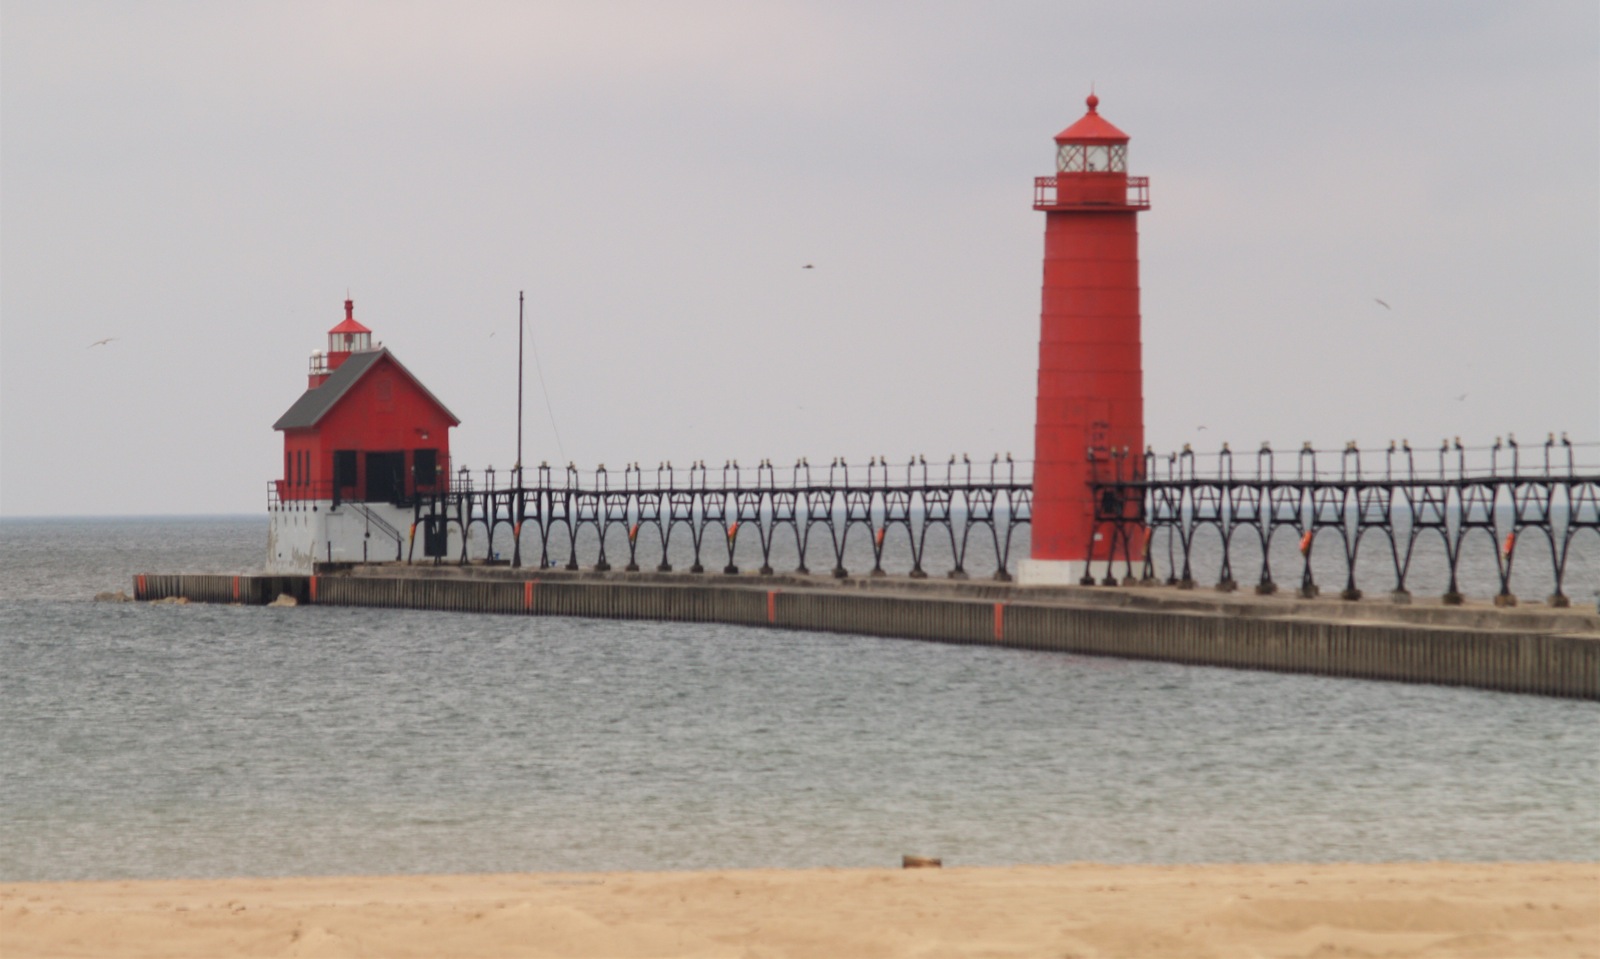 grand haven state park camping